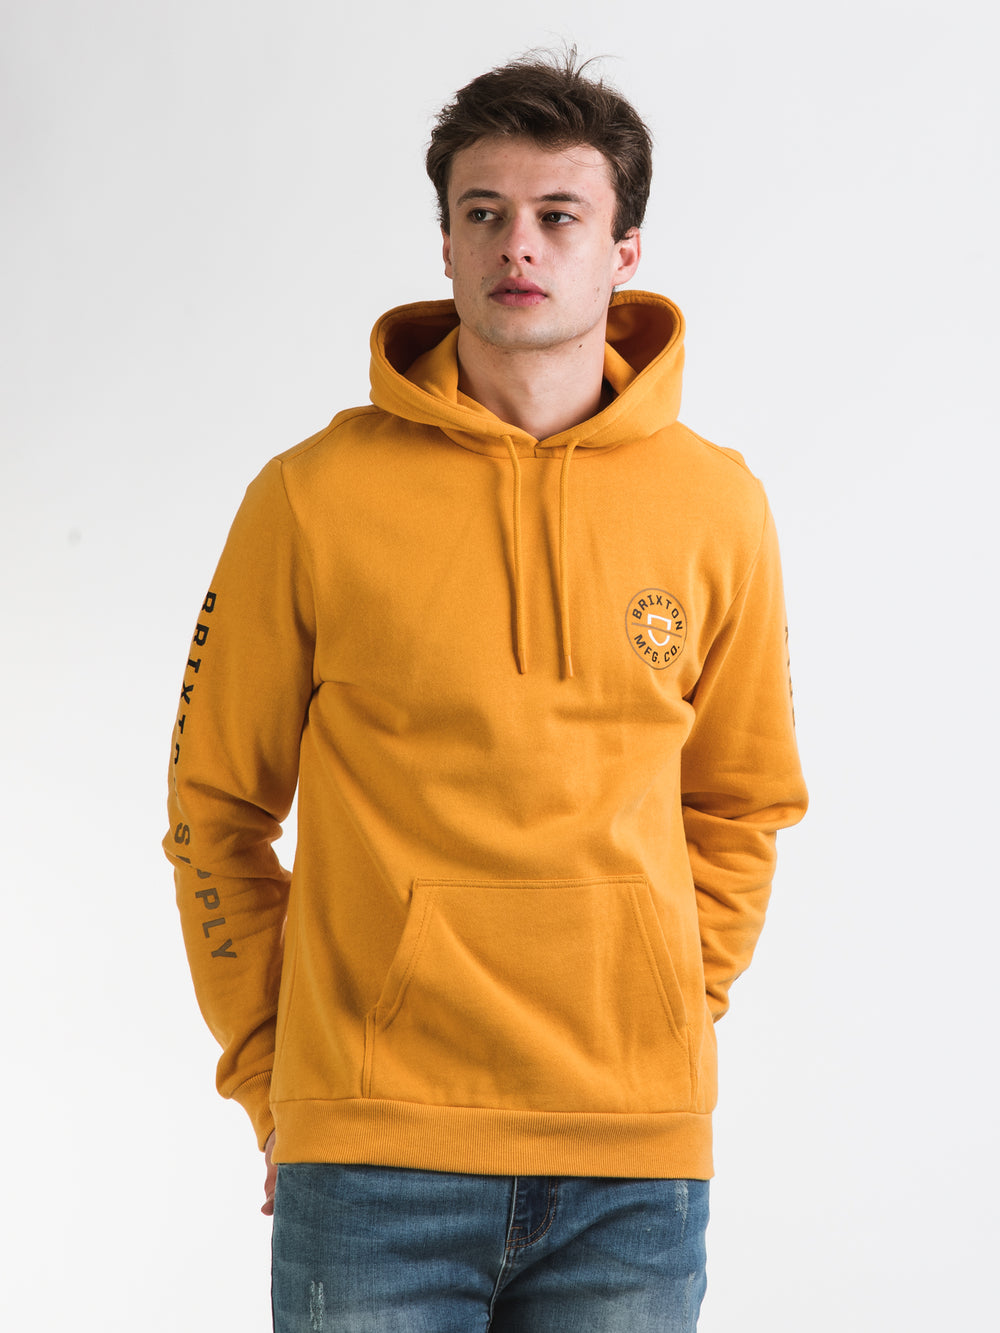 BRIXTON CREST PULL OVER HOODIE GOLDEN GLOW - CLEARANCE